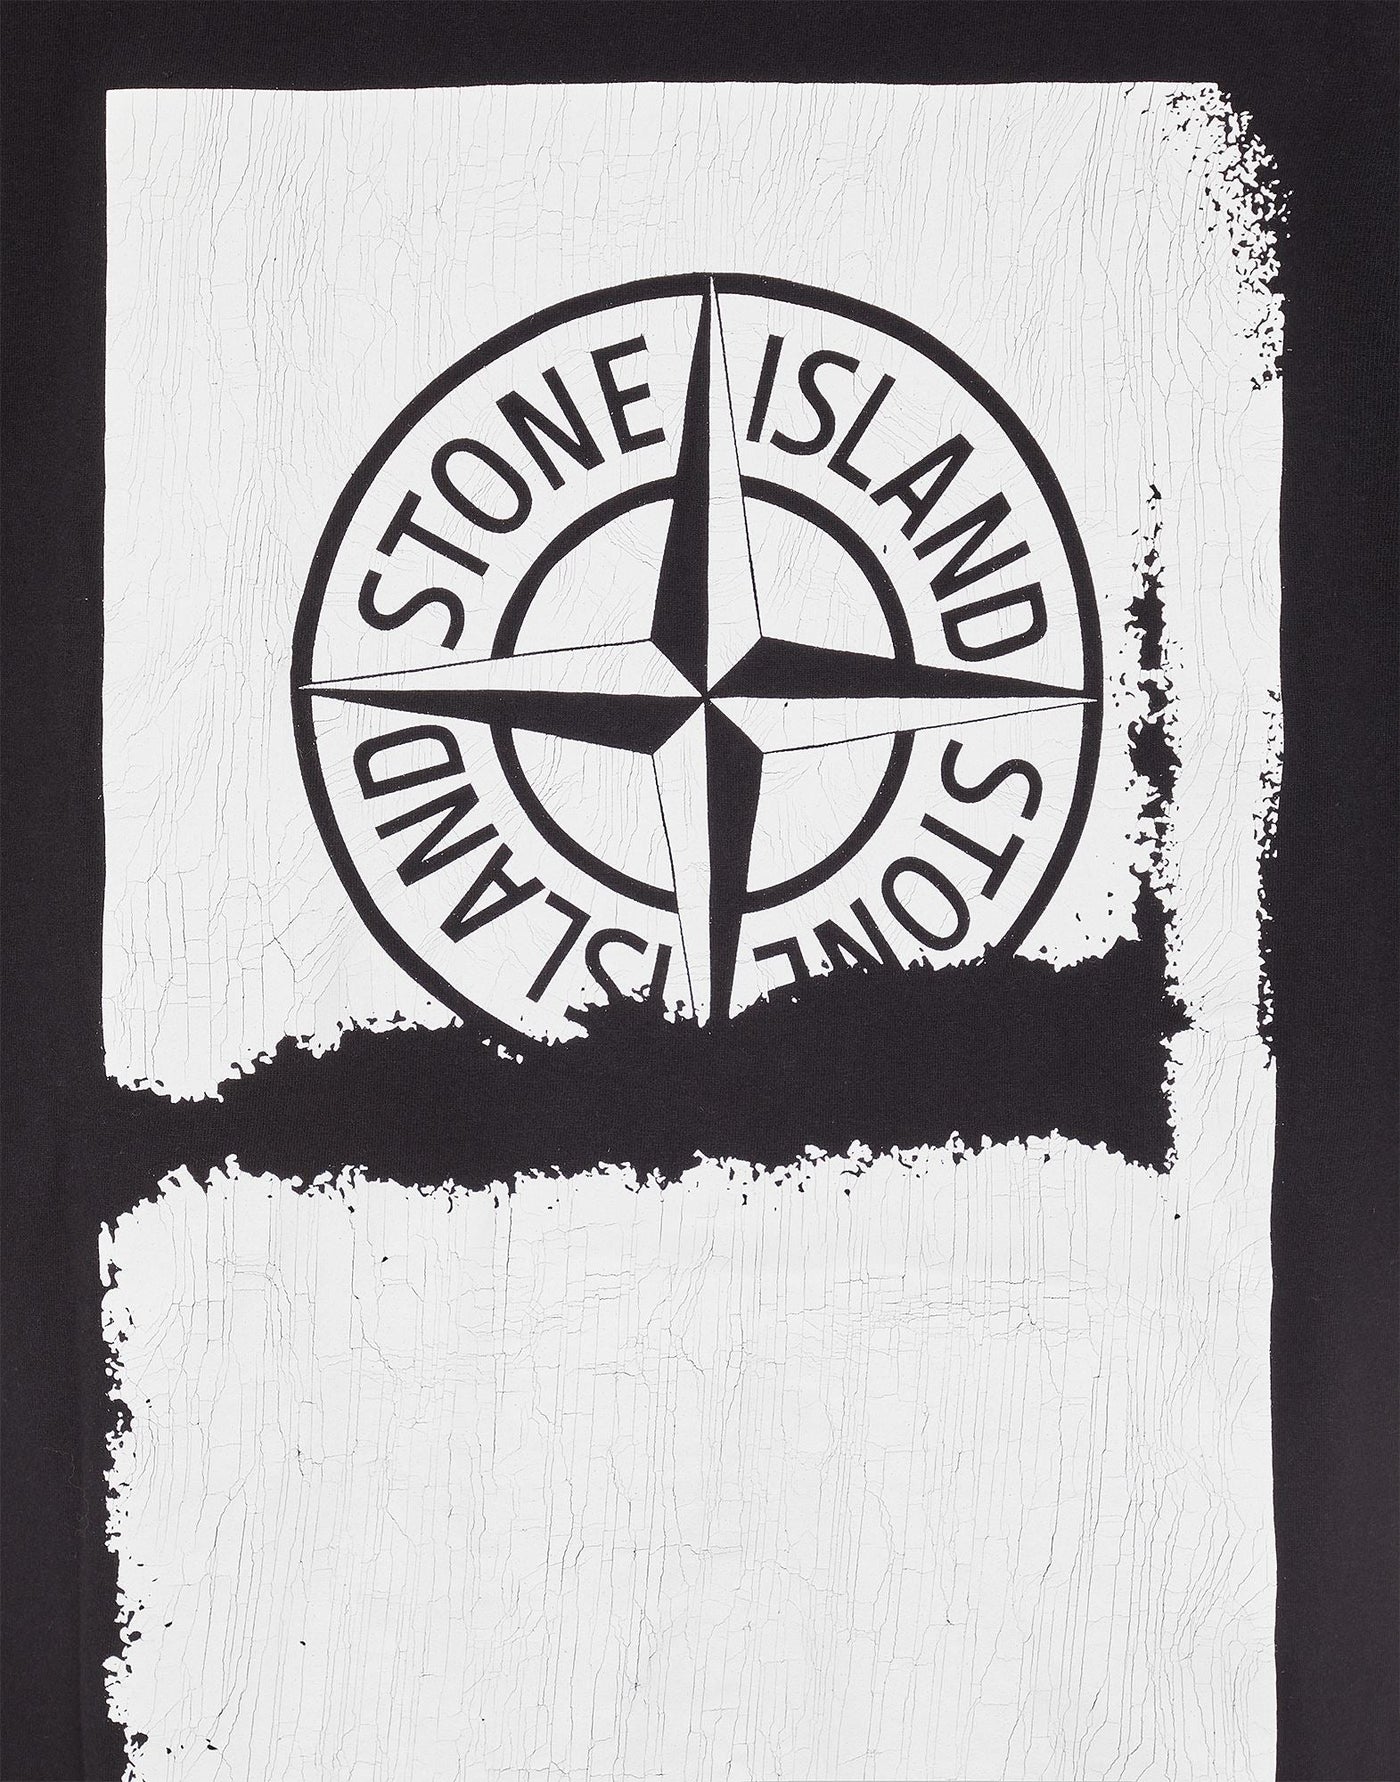 Stone Island - T-Shirt black 2RC89 'SCRATCHED PAINT ONE' PRINT - Lothaire